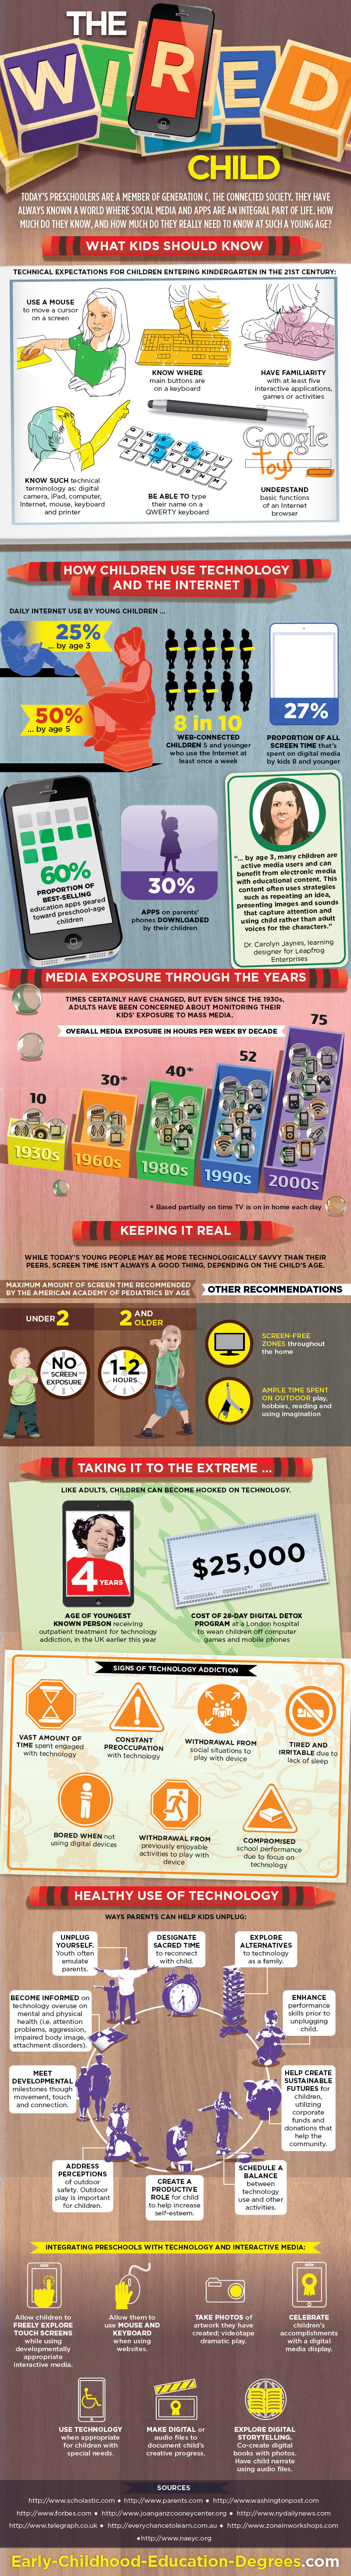 Wired Child Infographic